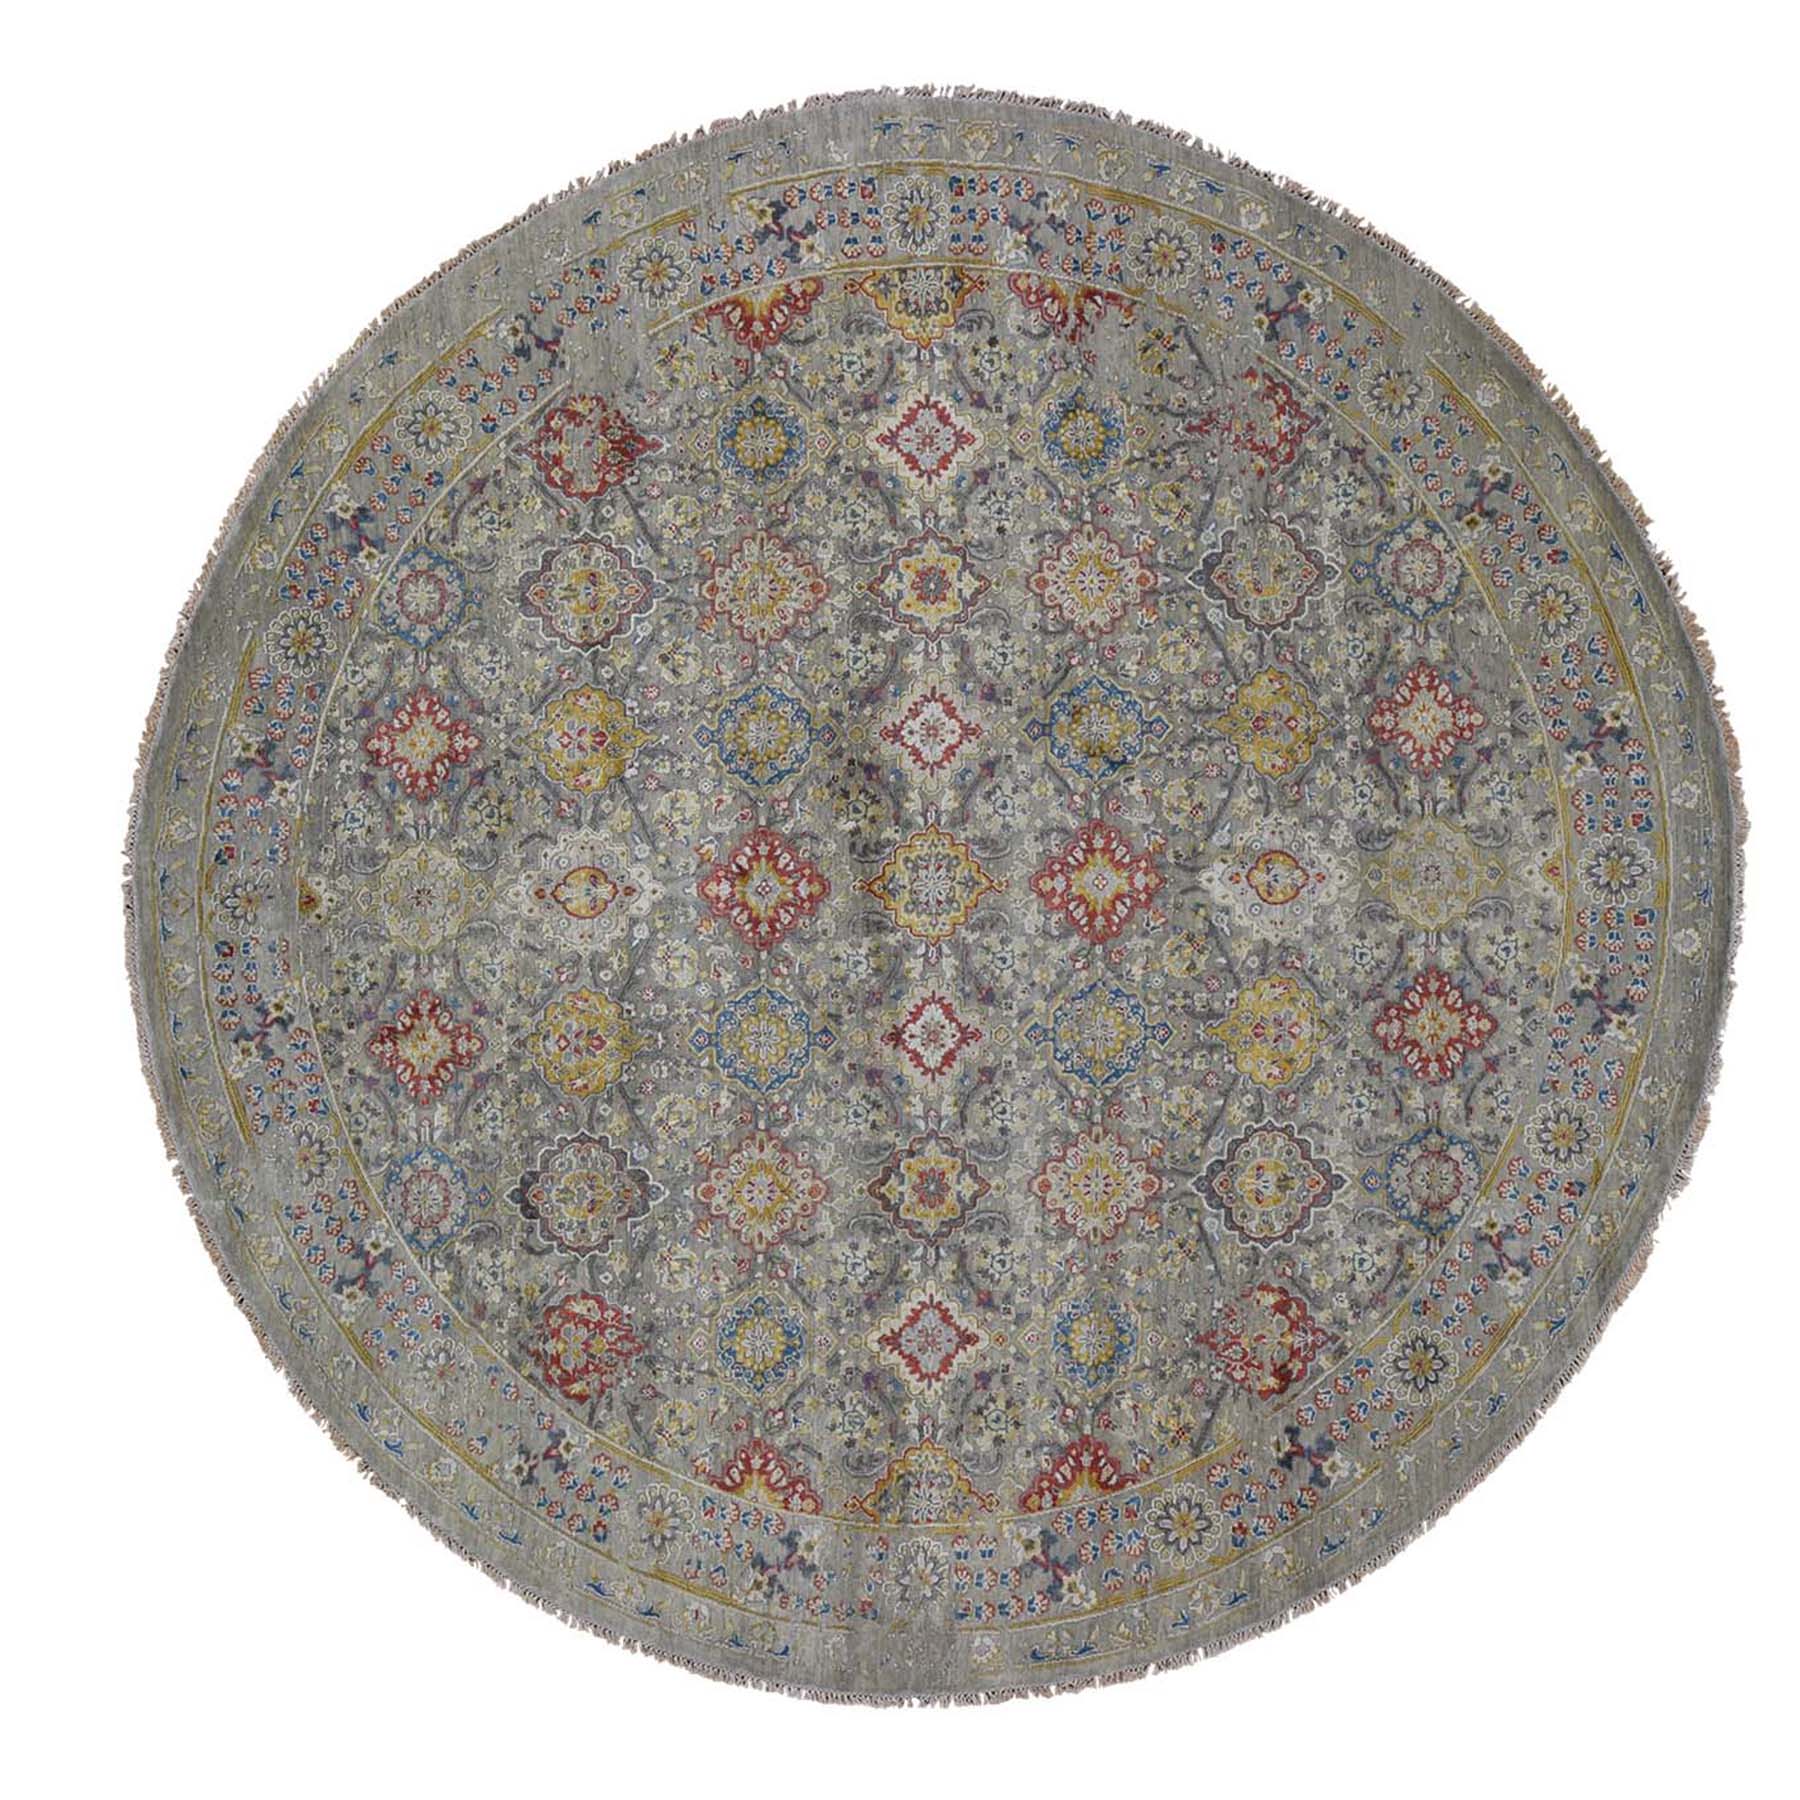 10'x10' THE SUNSET ROSETTES Pure Silk and Wool Hand Woven Oriental Round Rug 